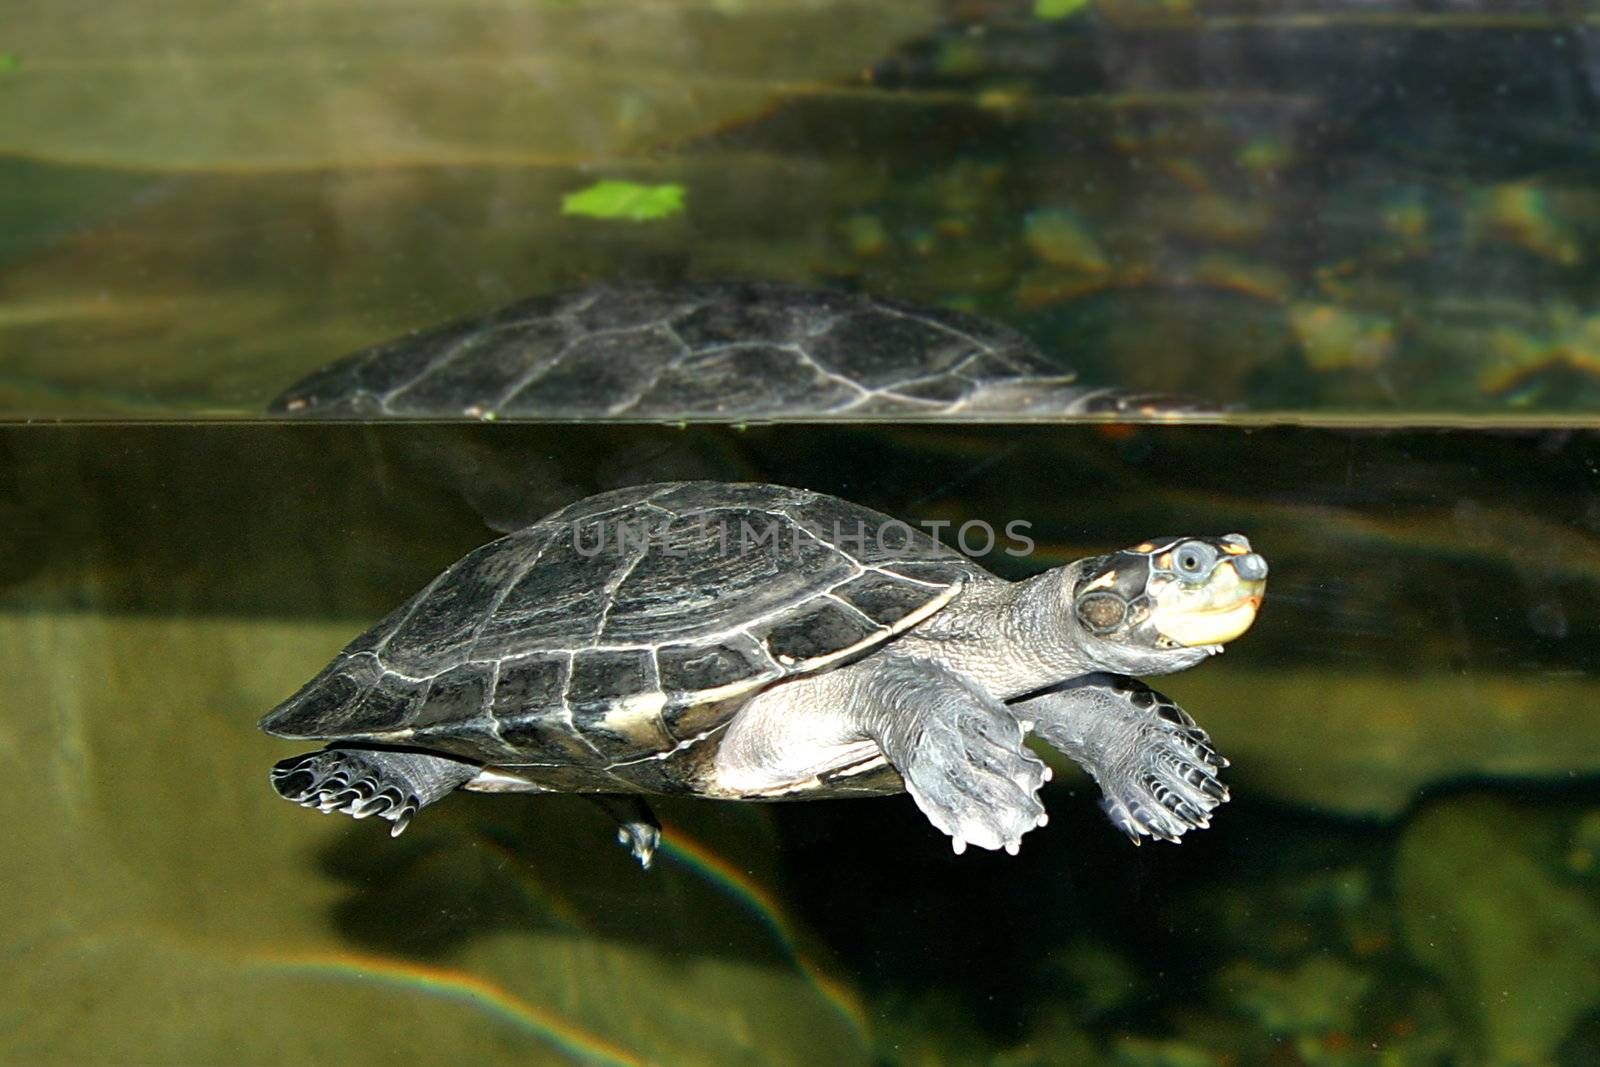 Turtles are reptilians of the Order Testudines, most of whose body is shielded by a special bony or cartilaginous shell developed from their ribs.